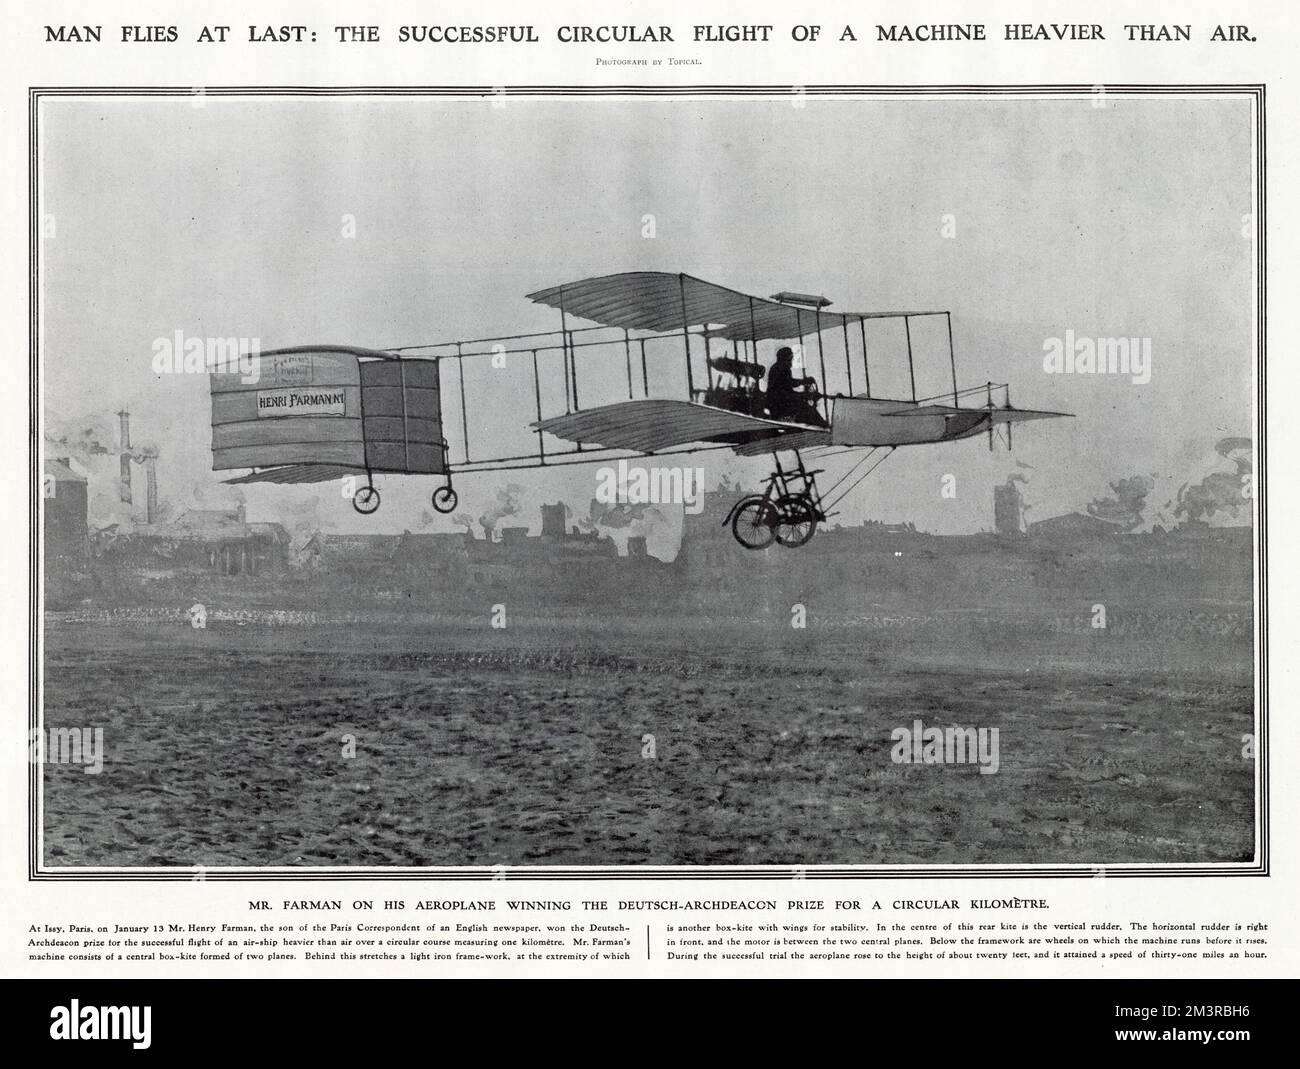 British-French pilot Henri Farman winning the Deutsch-Archdeacon prize of 50,000 francs at Issy-les-Moulineaux, France. For the successful flight of an aircraft heavier than air, flying at thirty-one miles an hour, over a circular course measuring one kilometre. Stock Photo